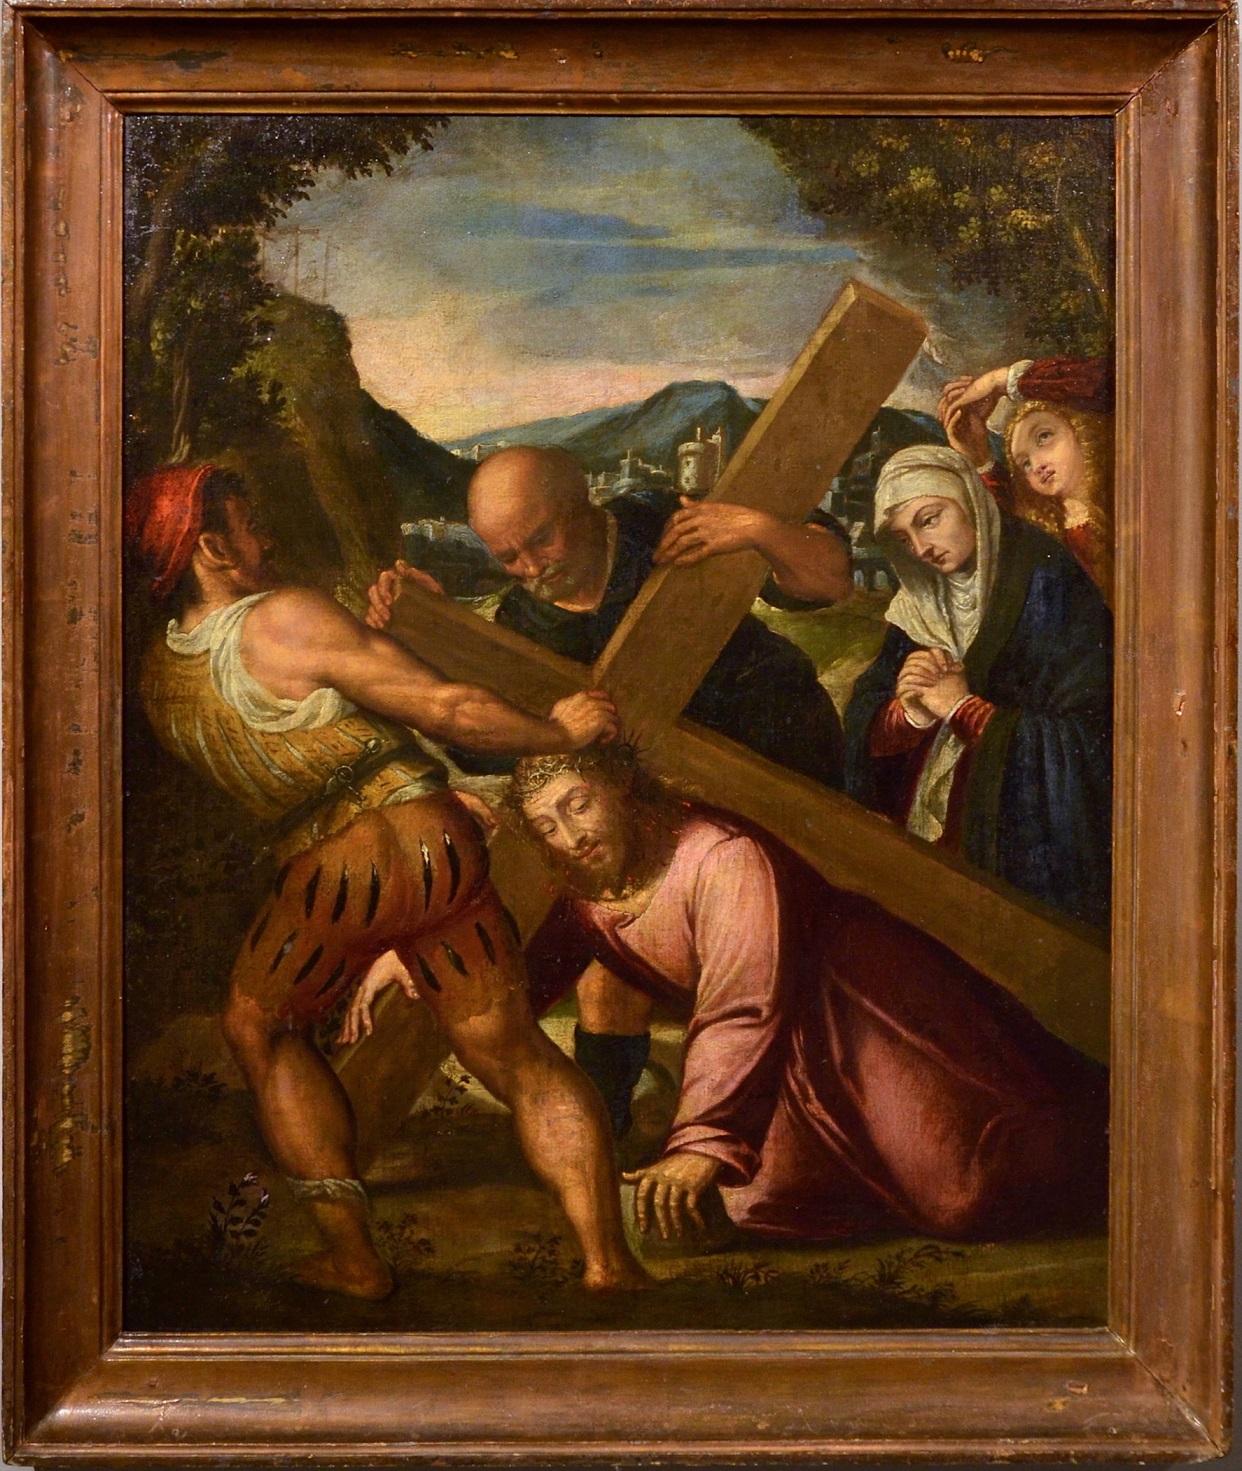 Christ Old master Oil on canvas Paint 17th Century Art Italy Religious Campi 